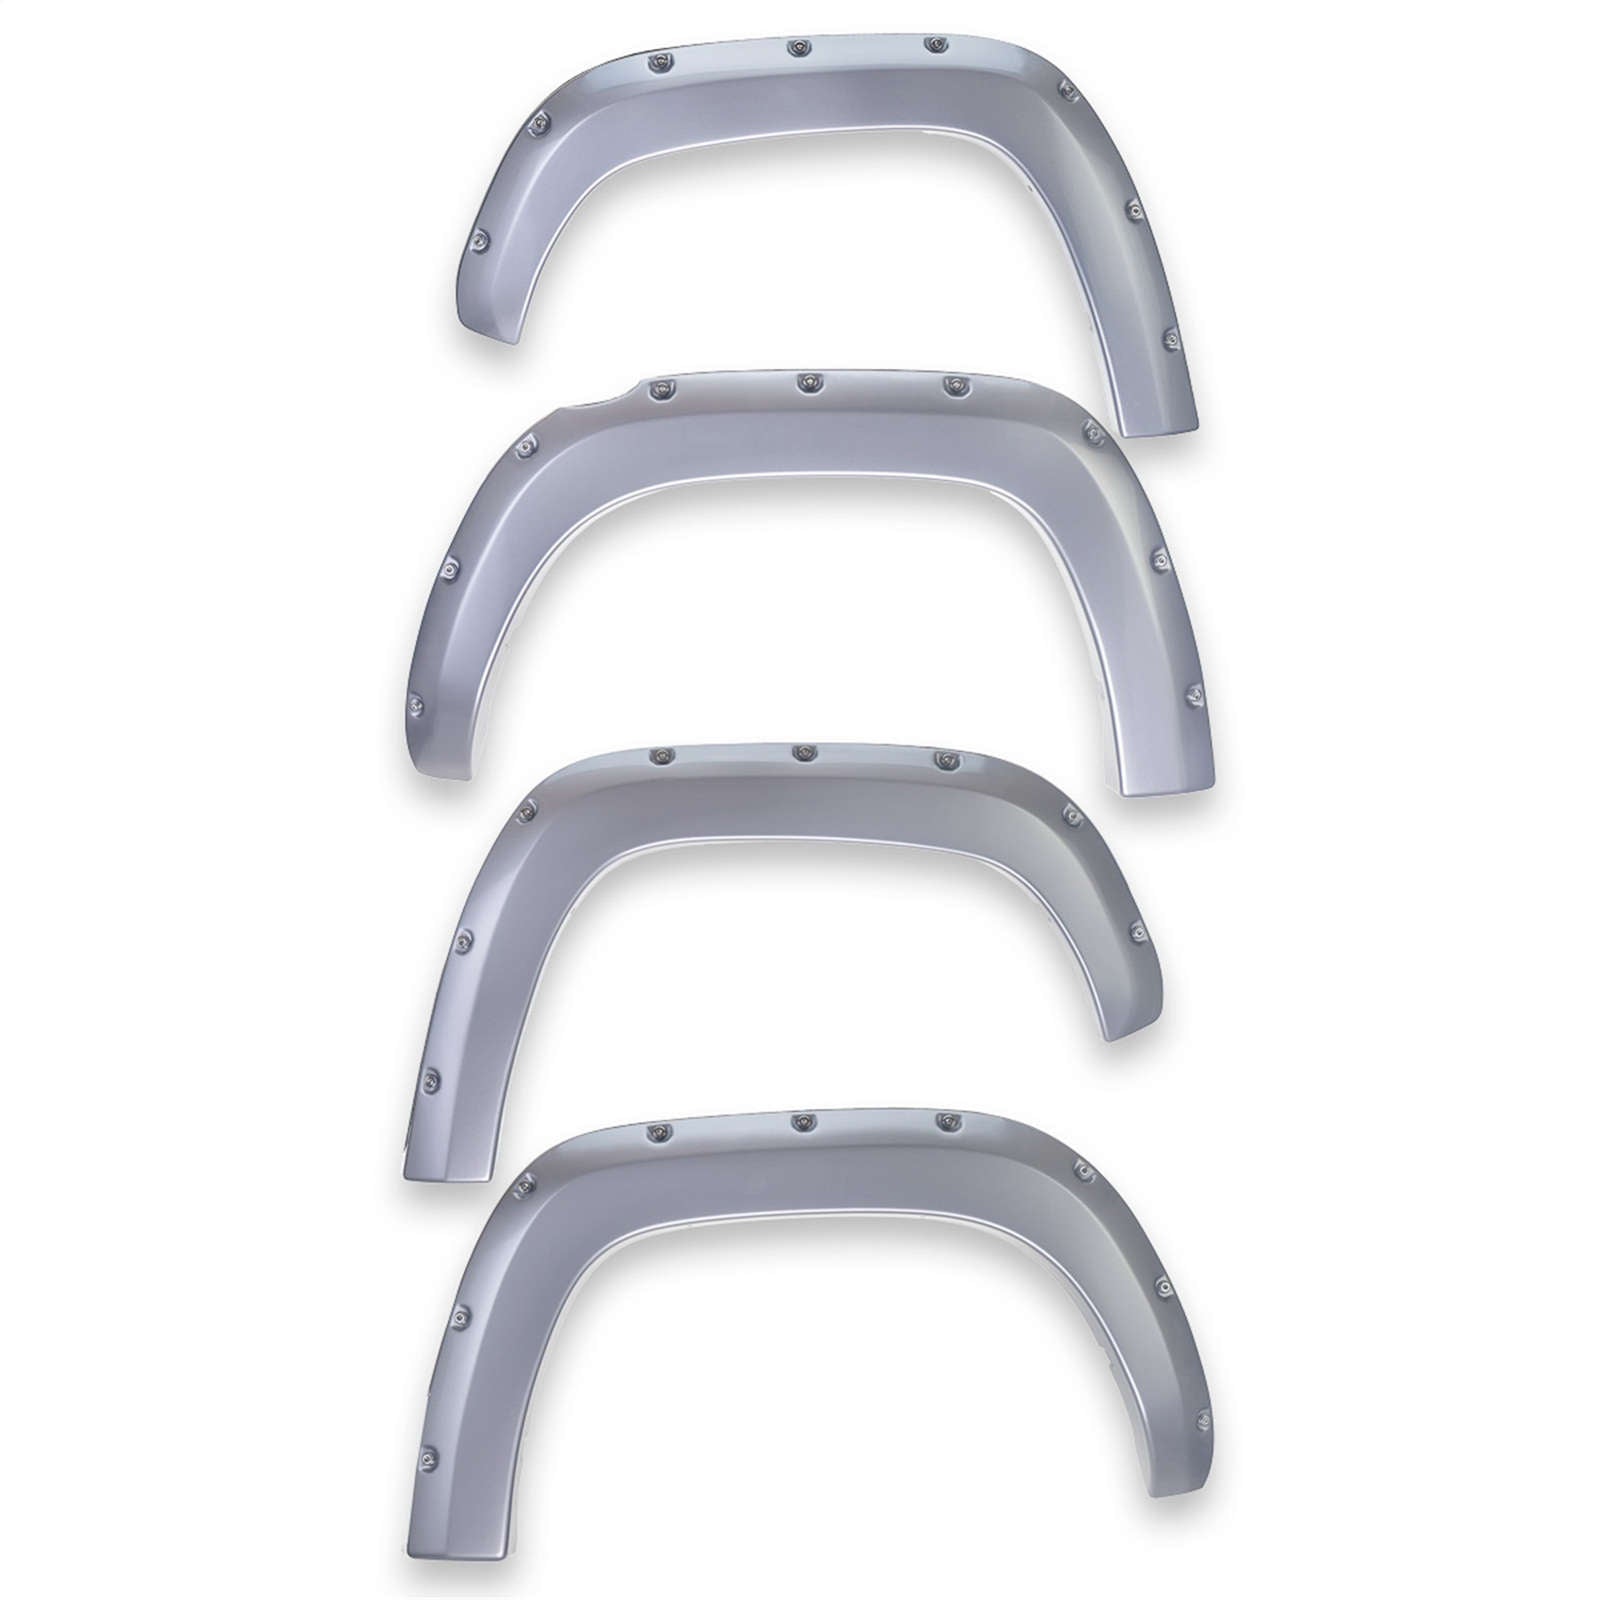 EGR 2015-2019 GMC Sierra 2500 3500 HD 2 & 4 Door Crew Standard Extended Cab Pickup Traditional Bolt-on look Fender Flares set of 4 Painted to Code Silver Metallic 791684-GAN